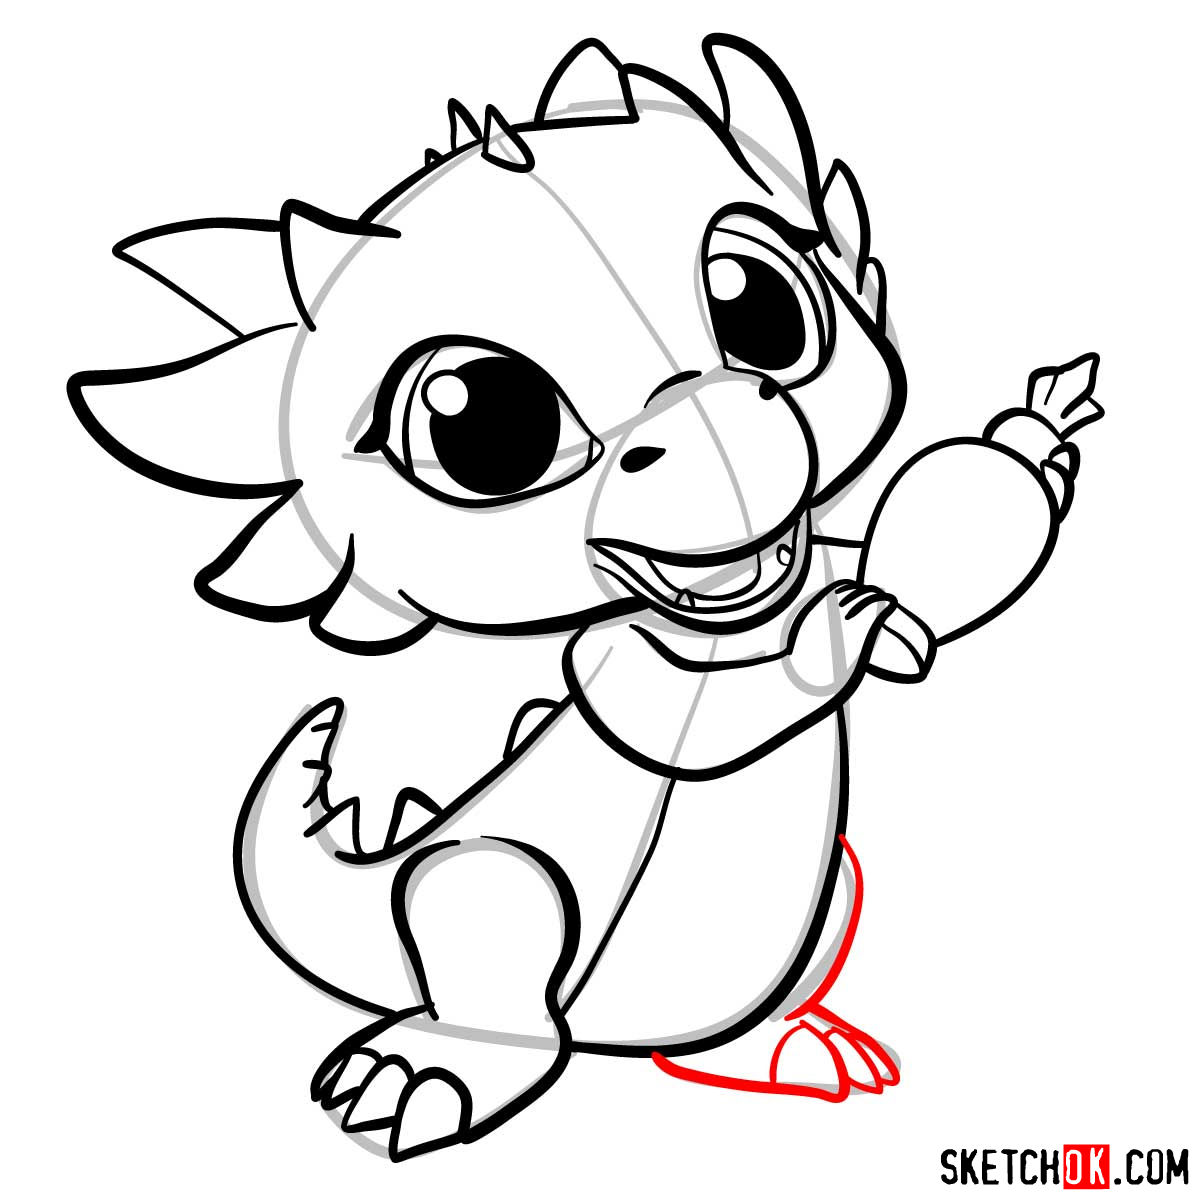 How to draw Nazboo the dragon pet from Shimmer and Shine - step 11